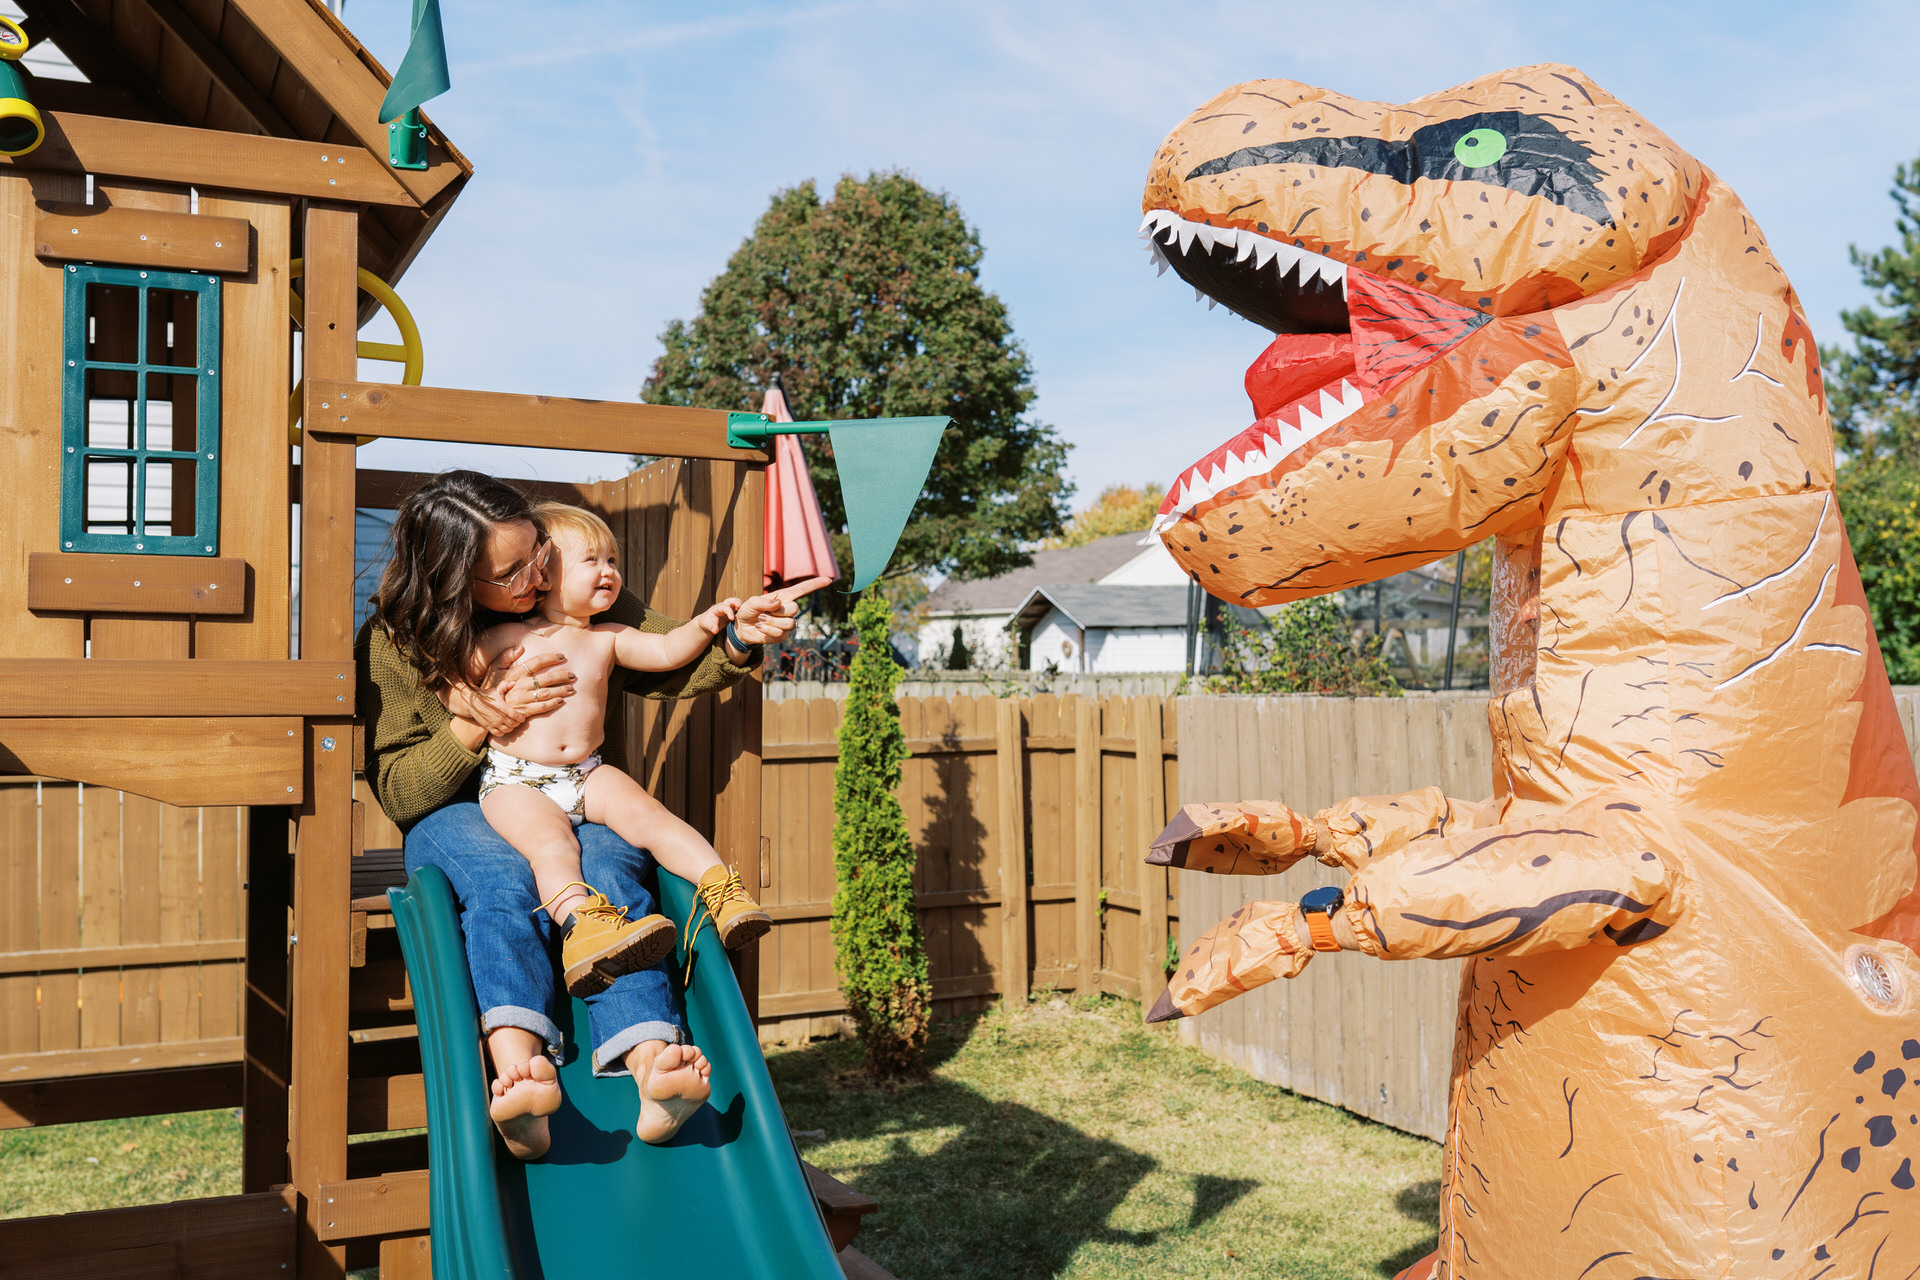 A mom and her toddler daughter sitting at the top of a slide while a person in a dinosaur costume approaches in a silly way